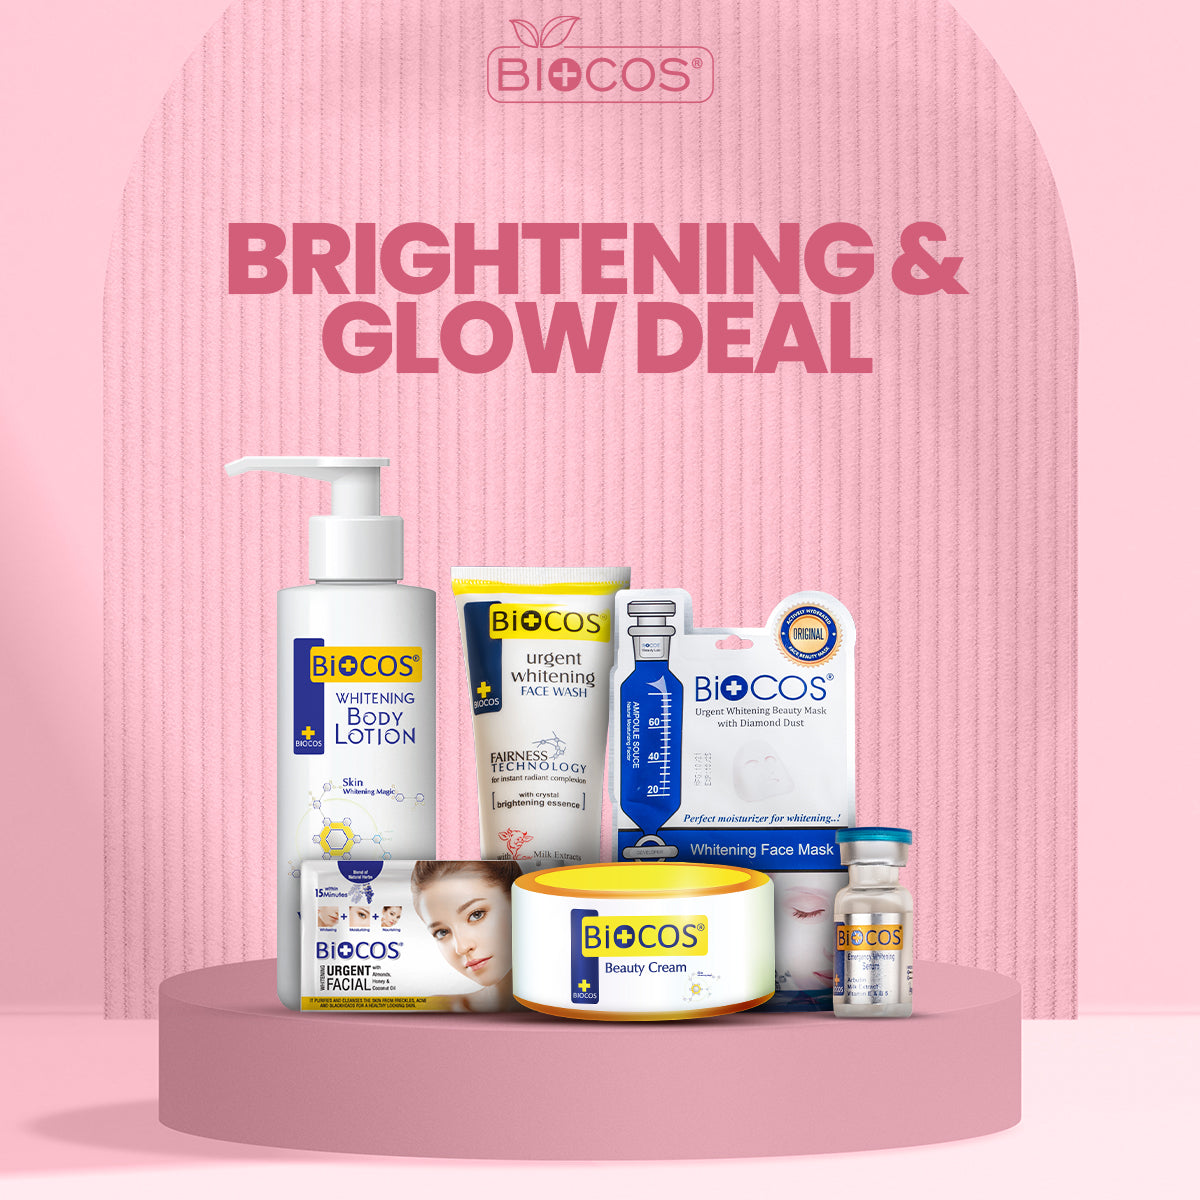 Brightening and Glow Deal